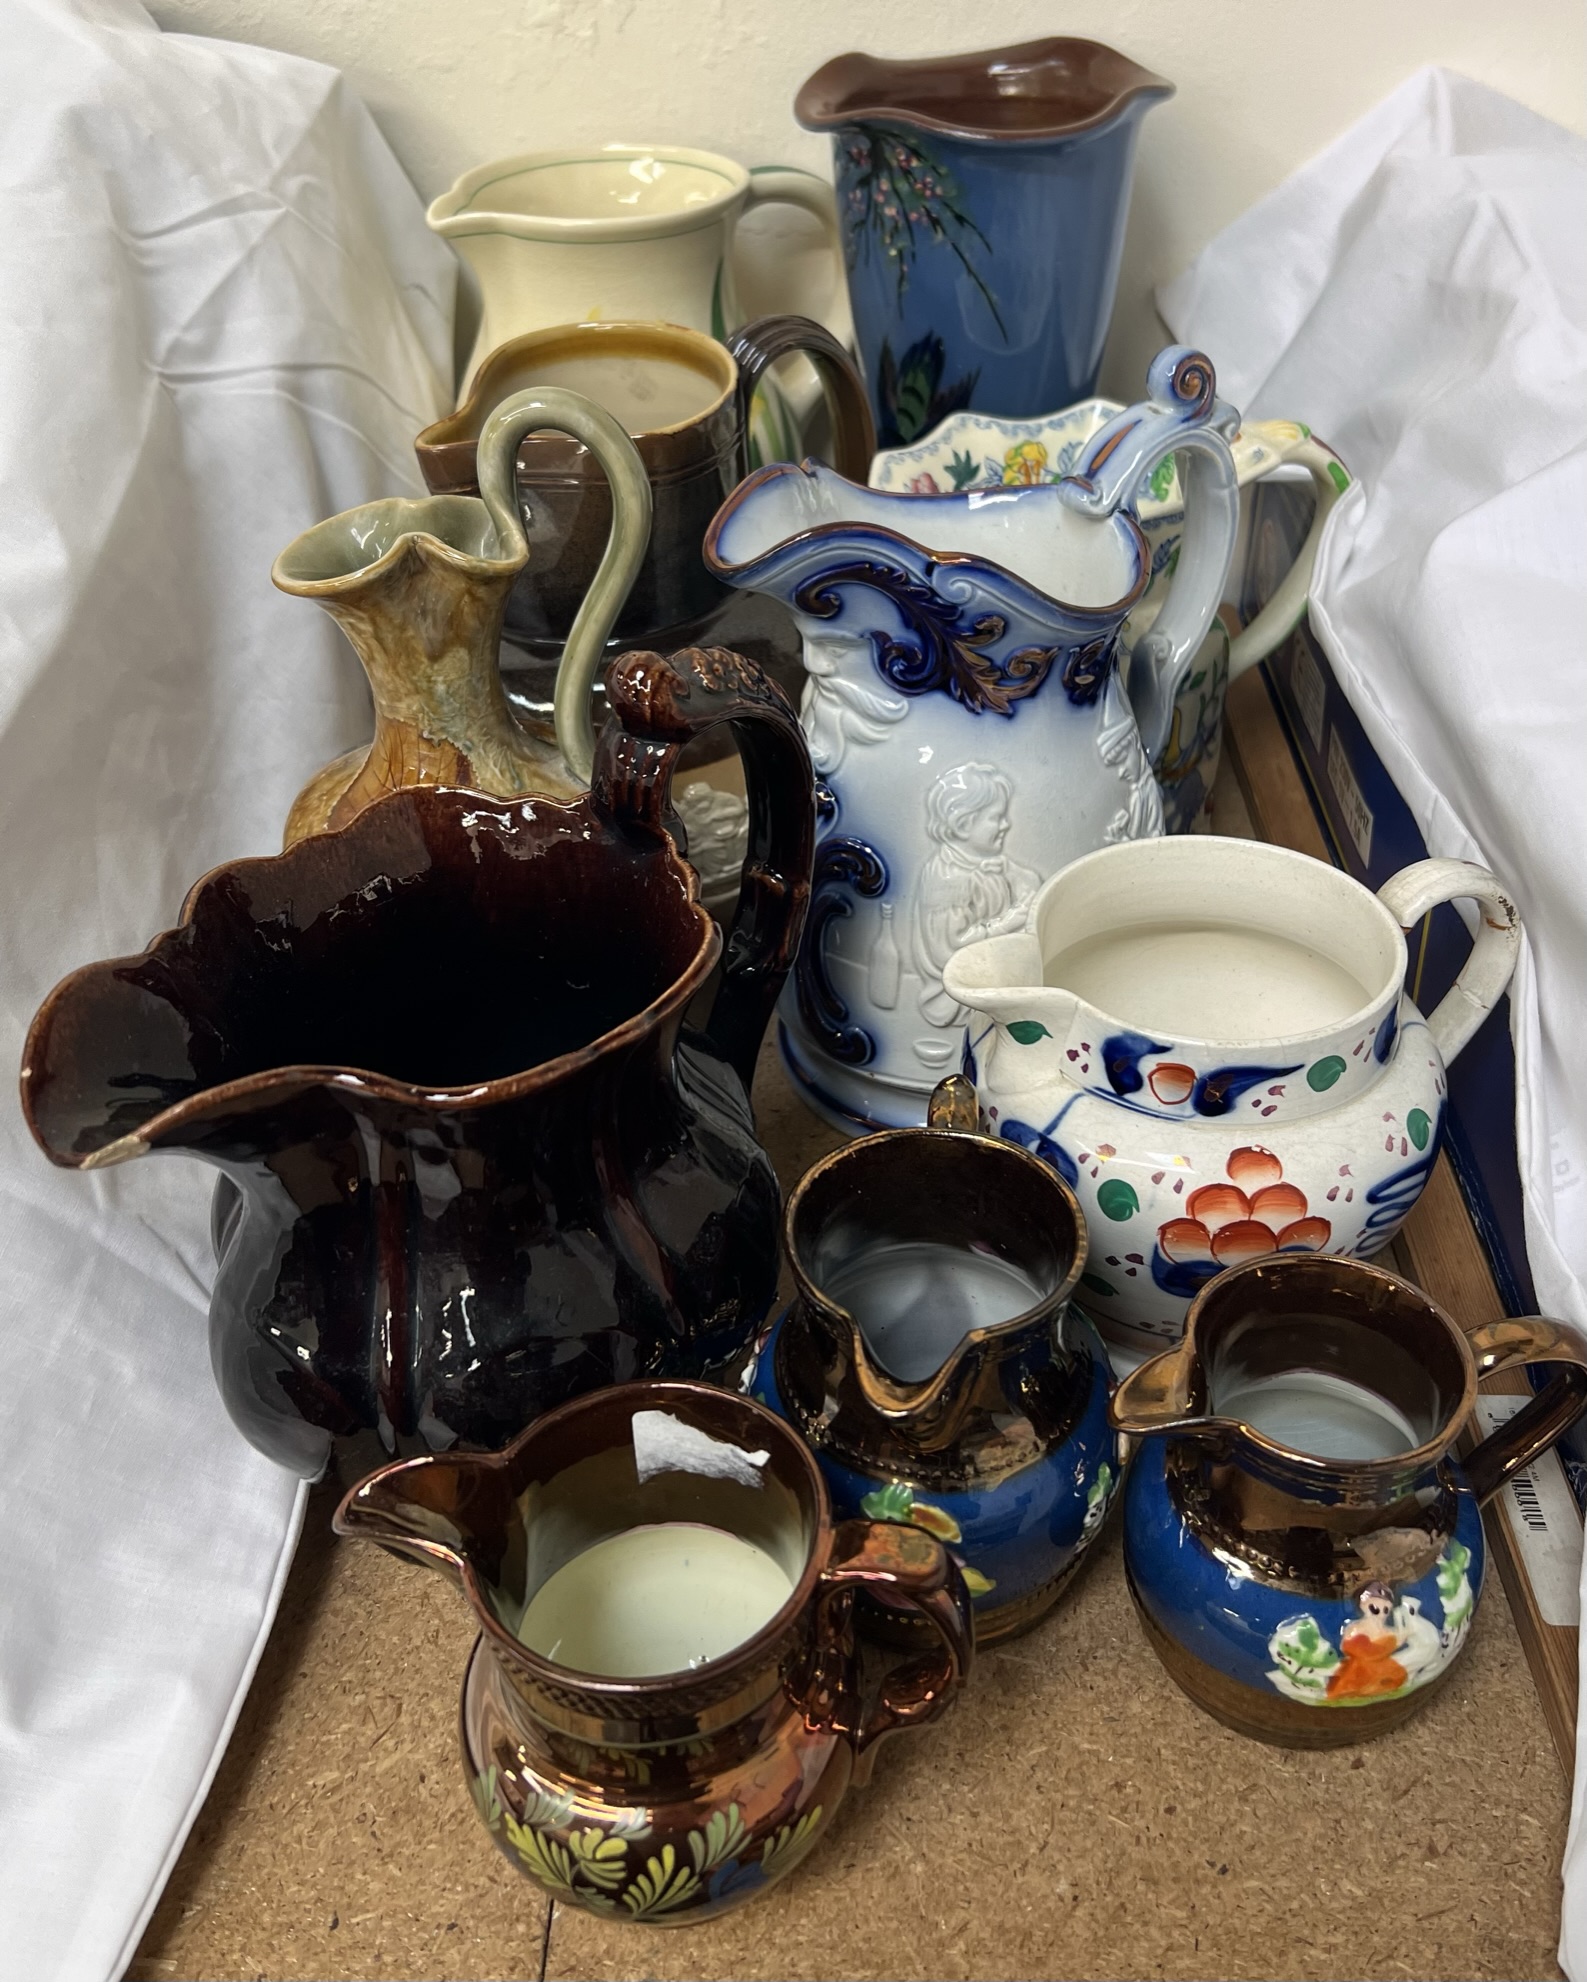 A Royal Doulton leaf moulded ewer together with a Royal Doulton Harvest ware jug and other jugs